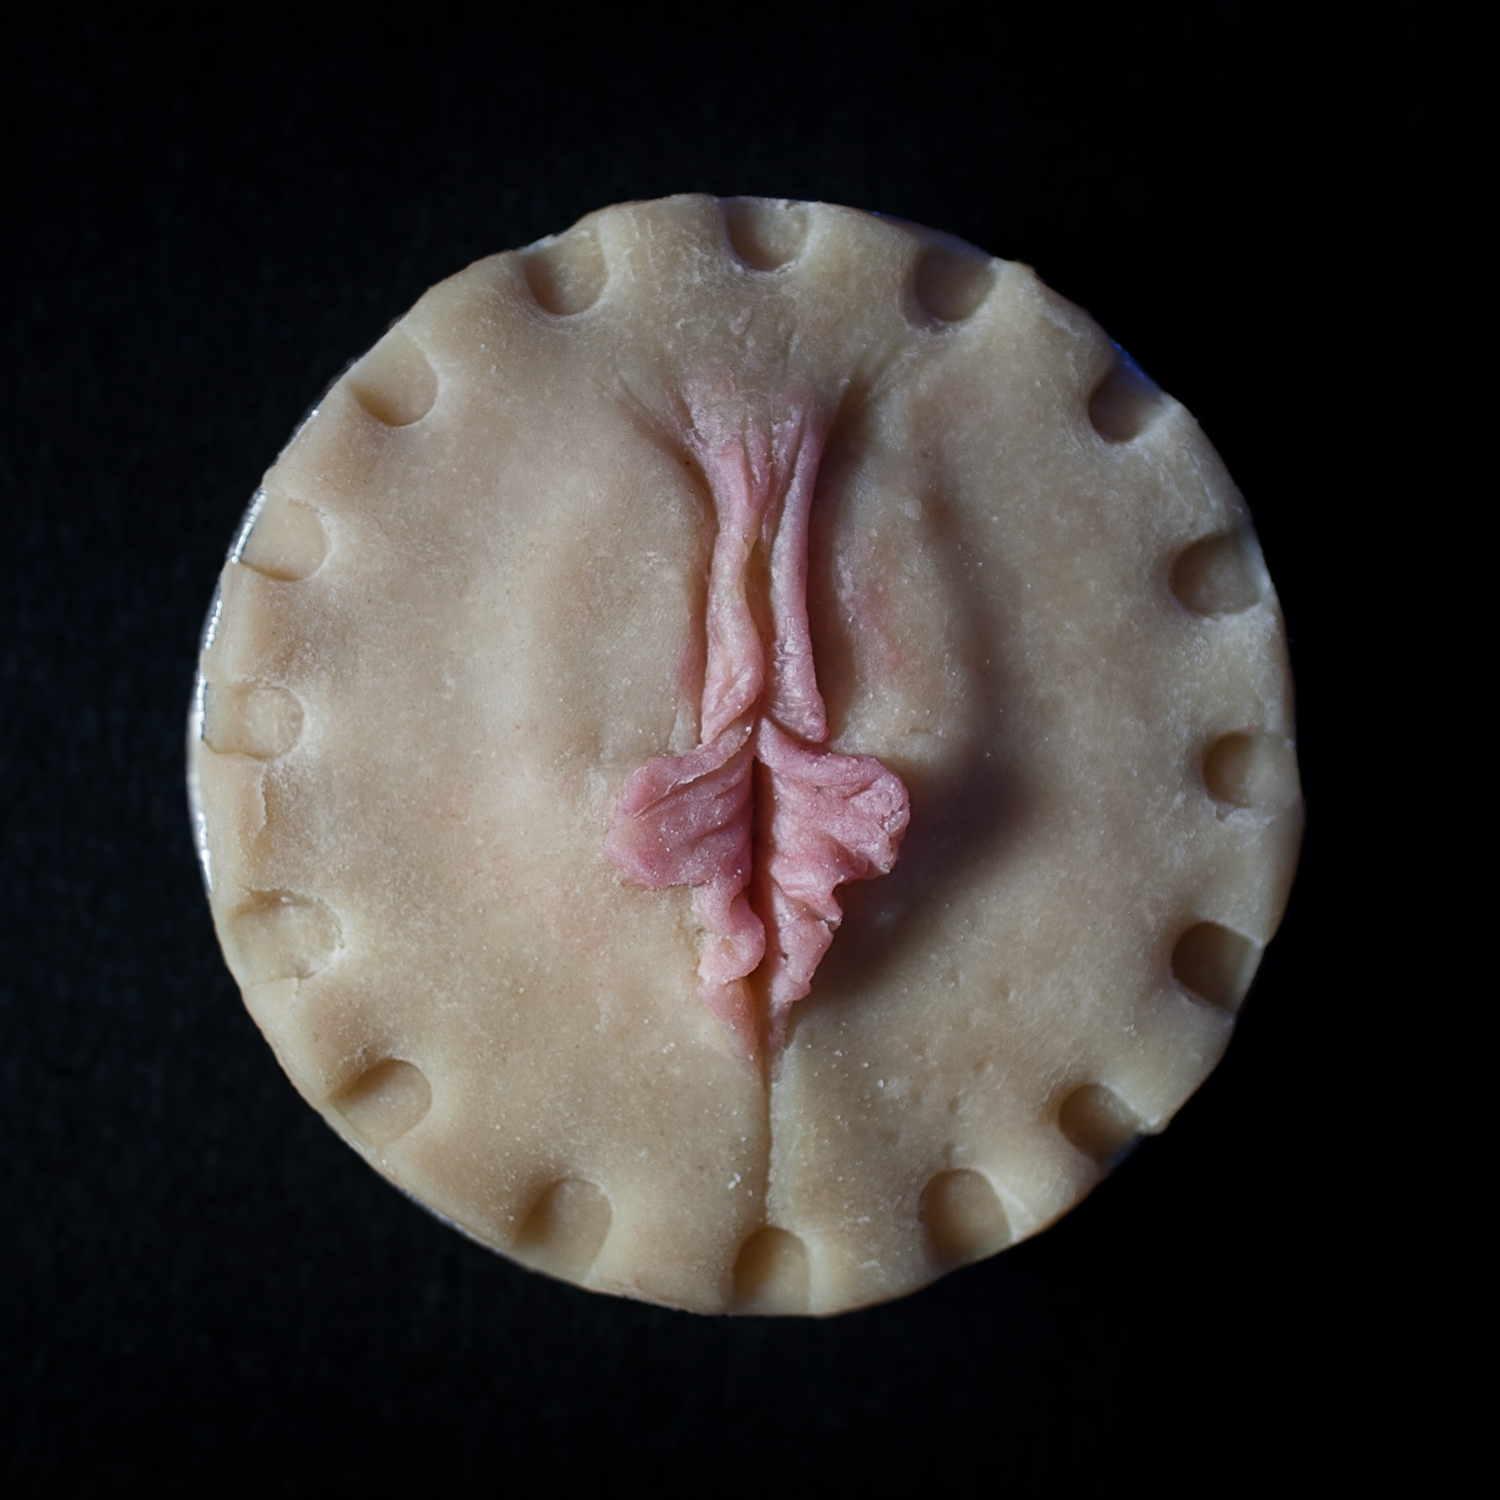 A pie with pie crust art that looks like a human vulva with pink inner labia protruding to demonstrate vulva diversity